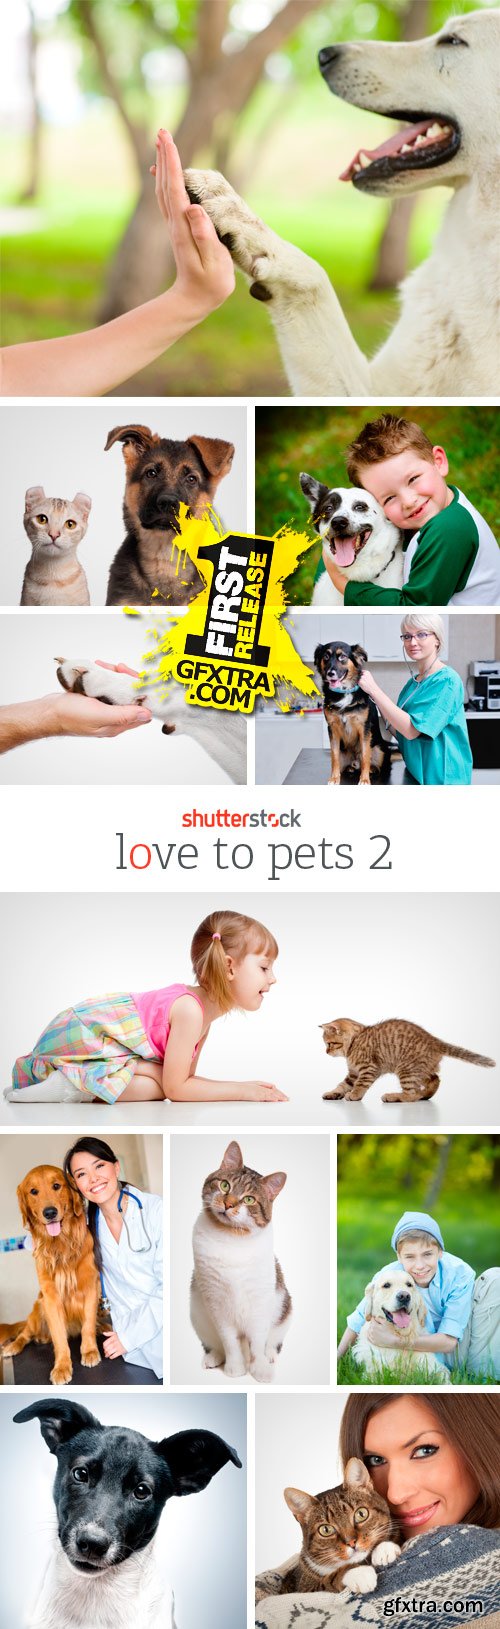 Love To Pets 2, 25xJPG